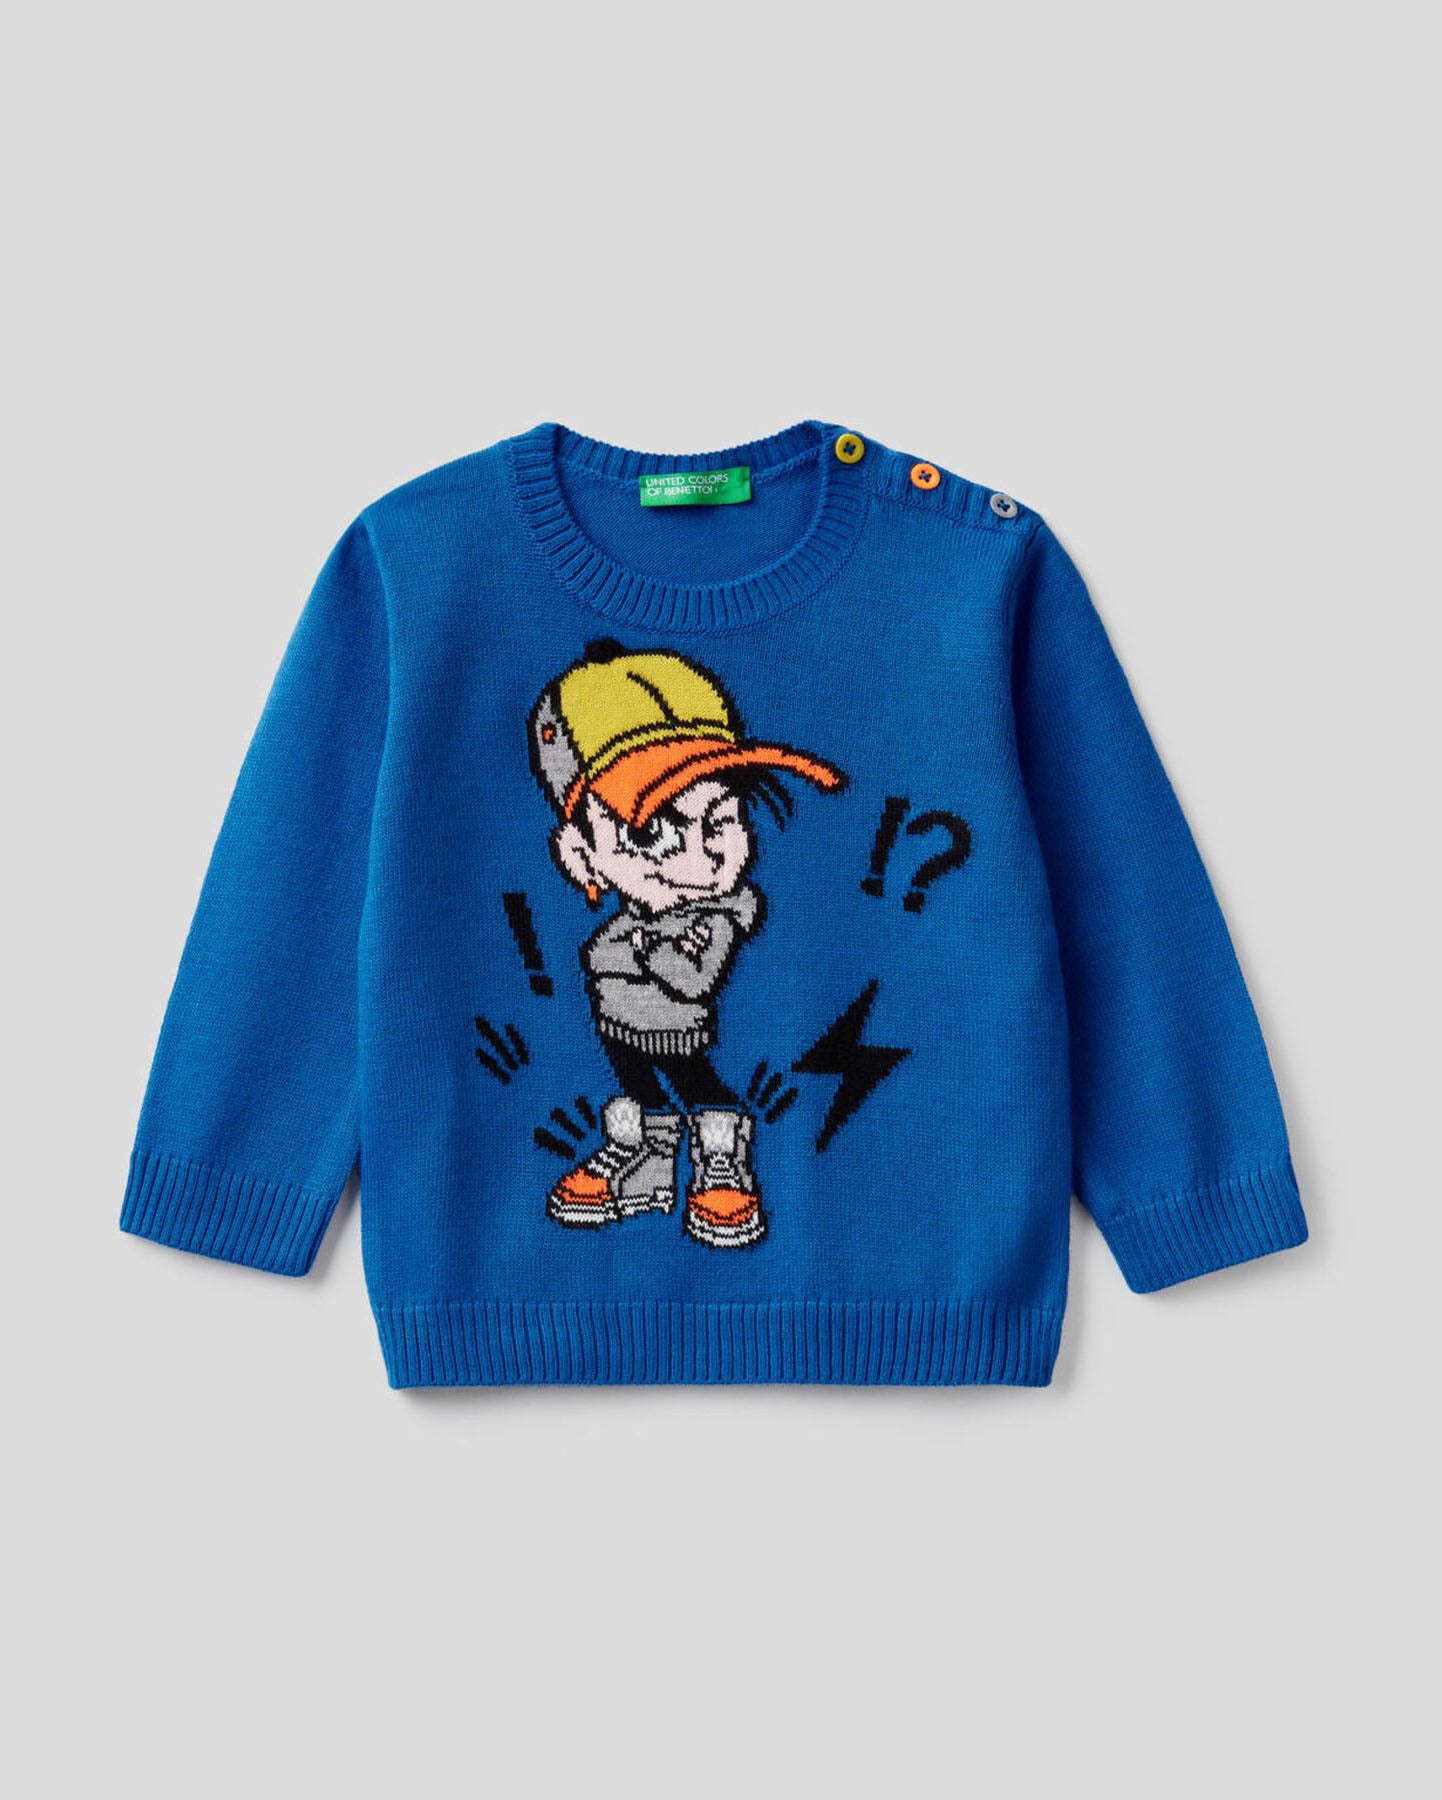 Middle Blue Sweater L/S